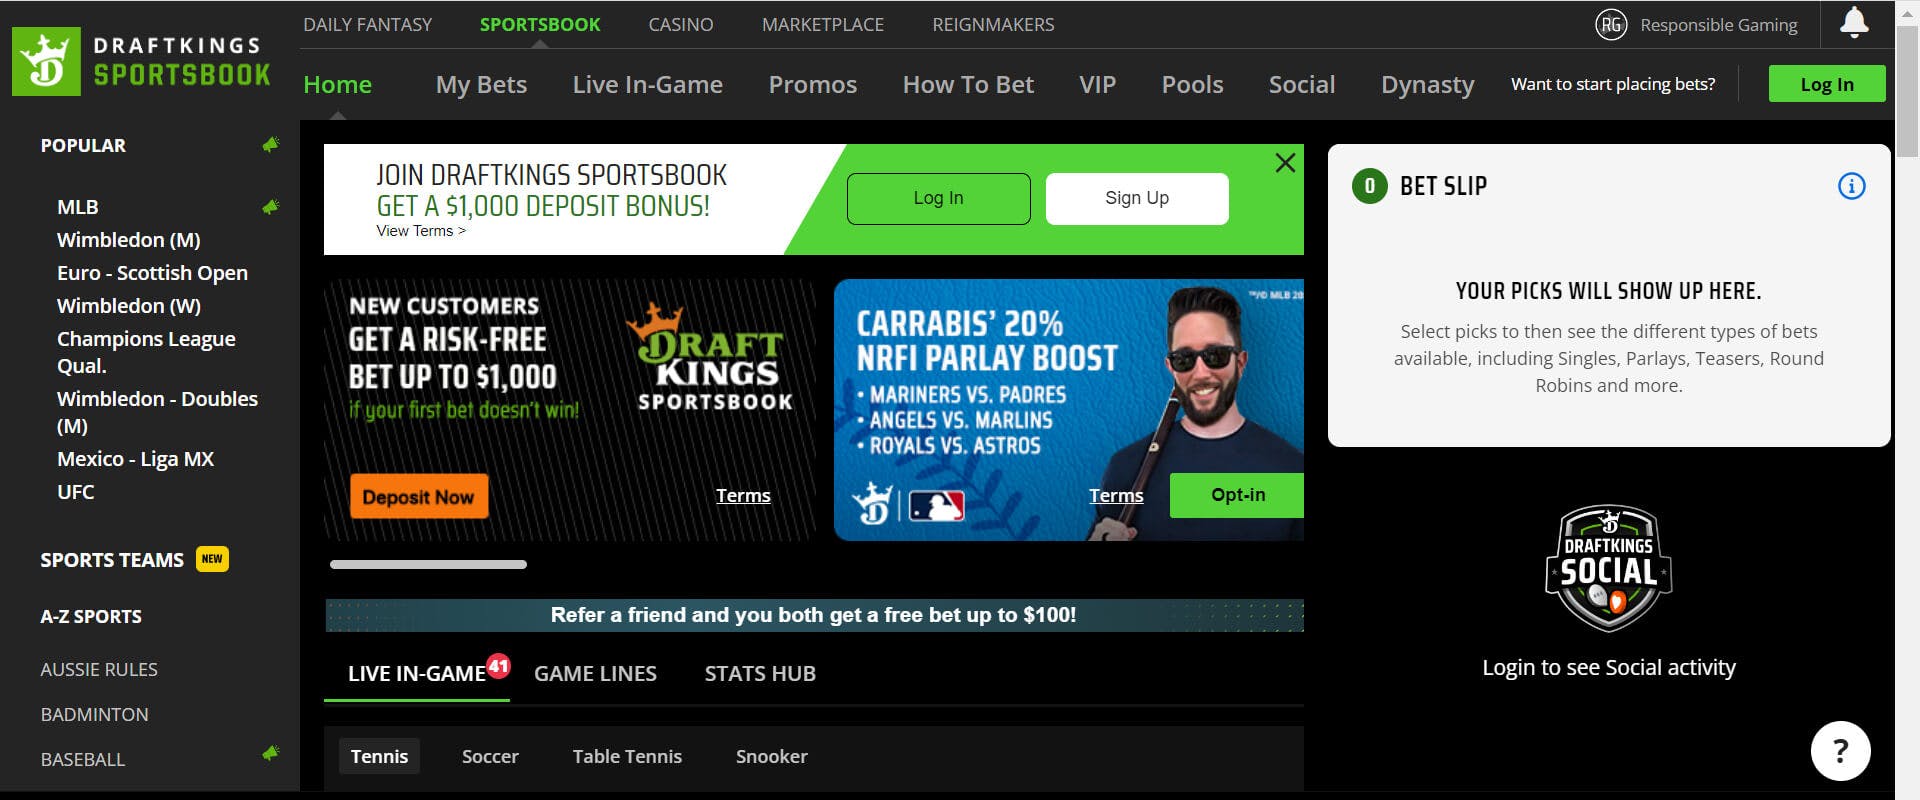 DraftKings Sportsbook home page<br>